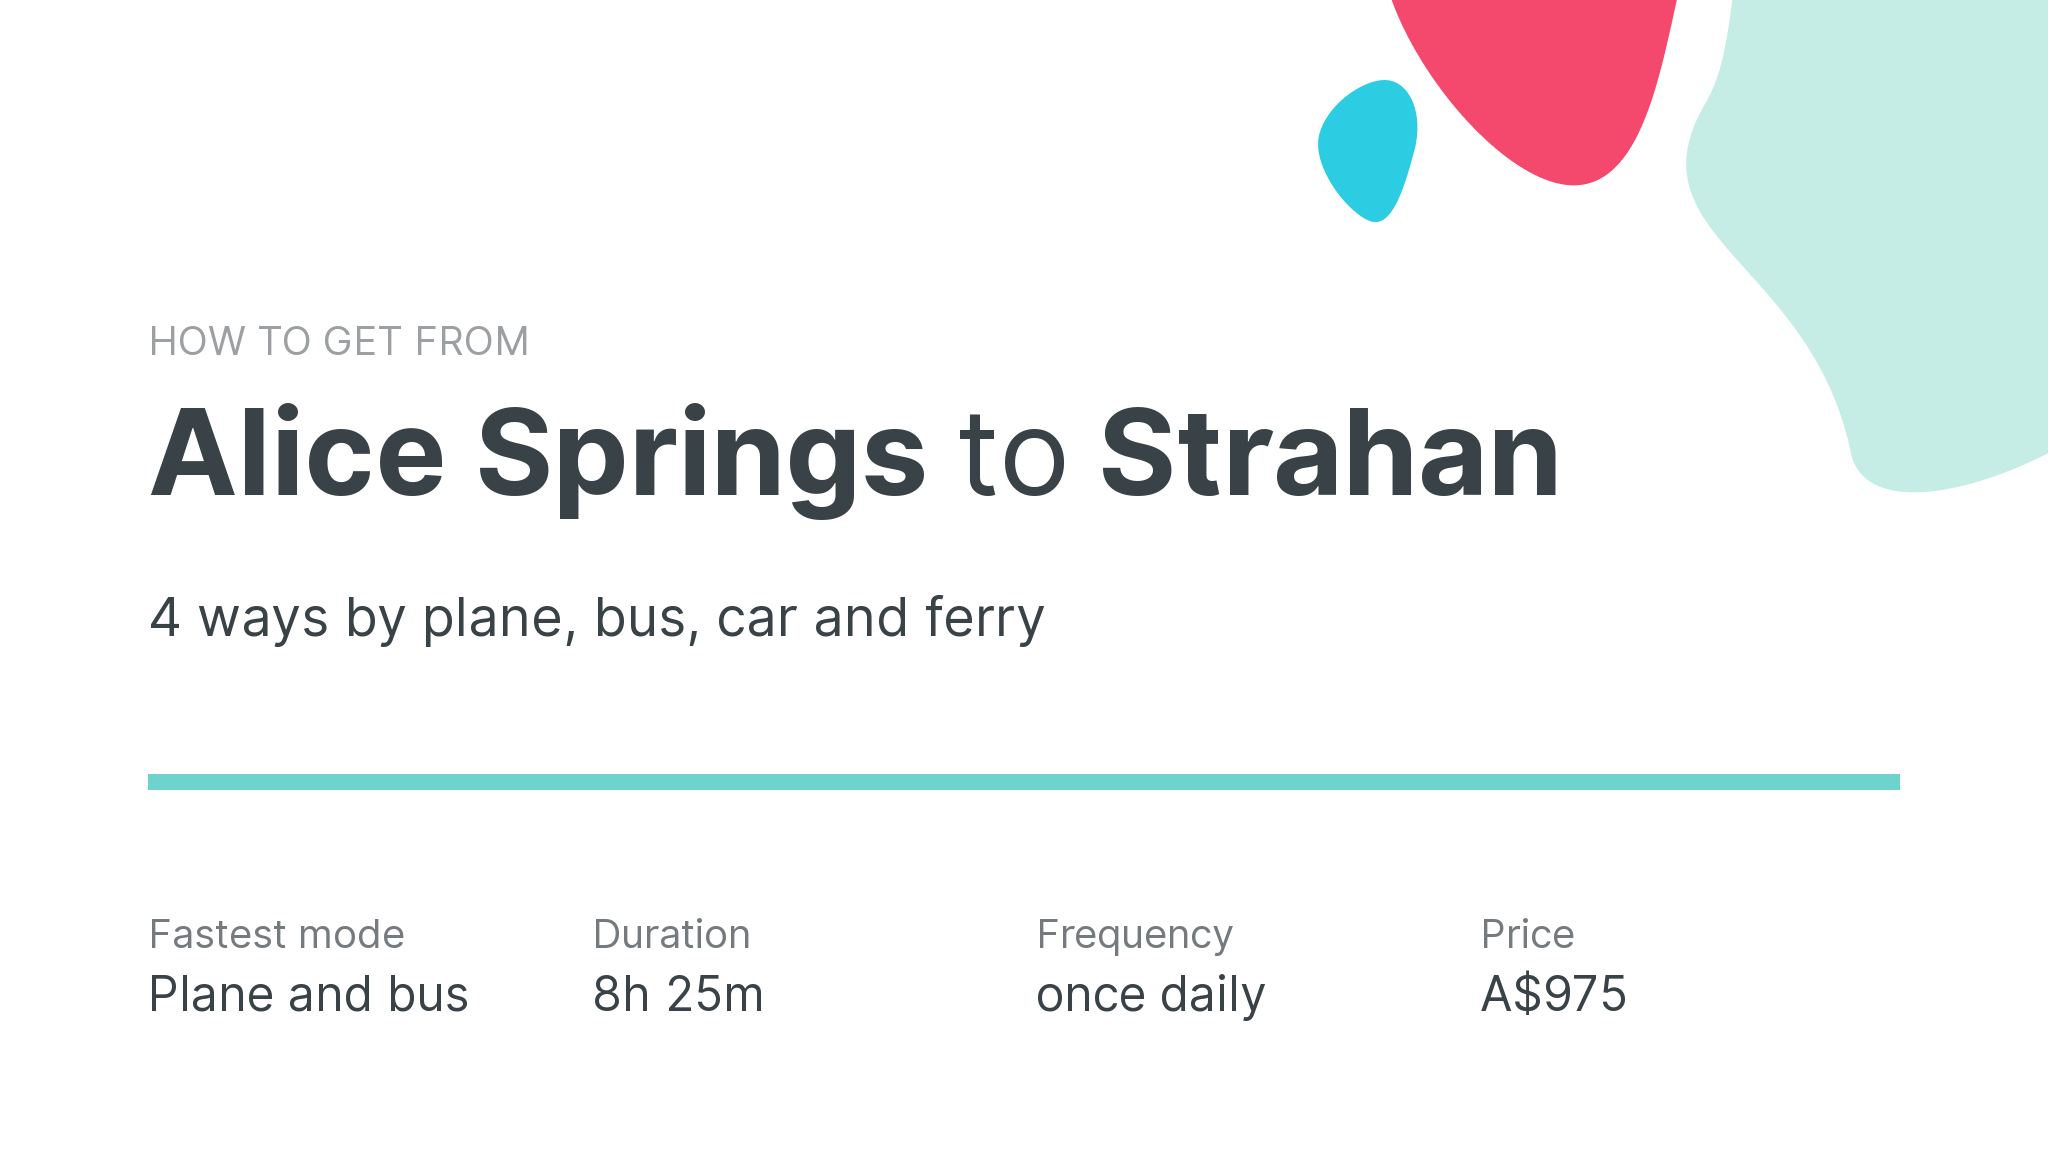 How do I get from Alice Springs to Strahan